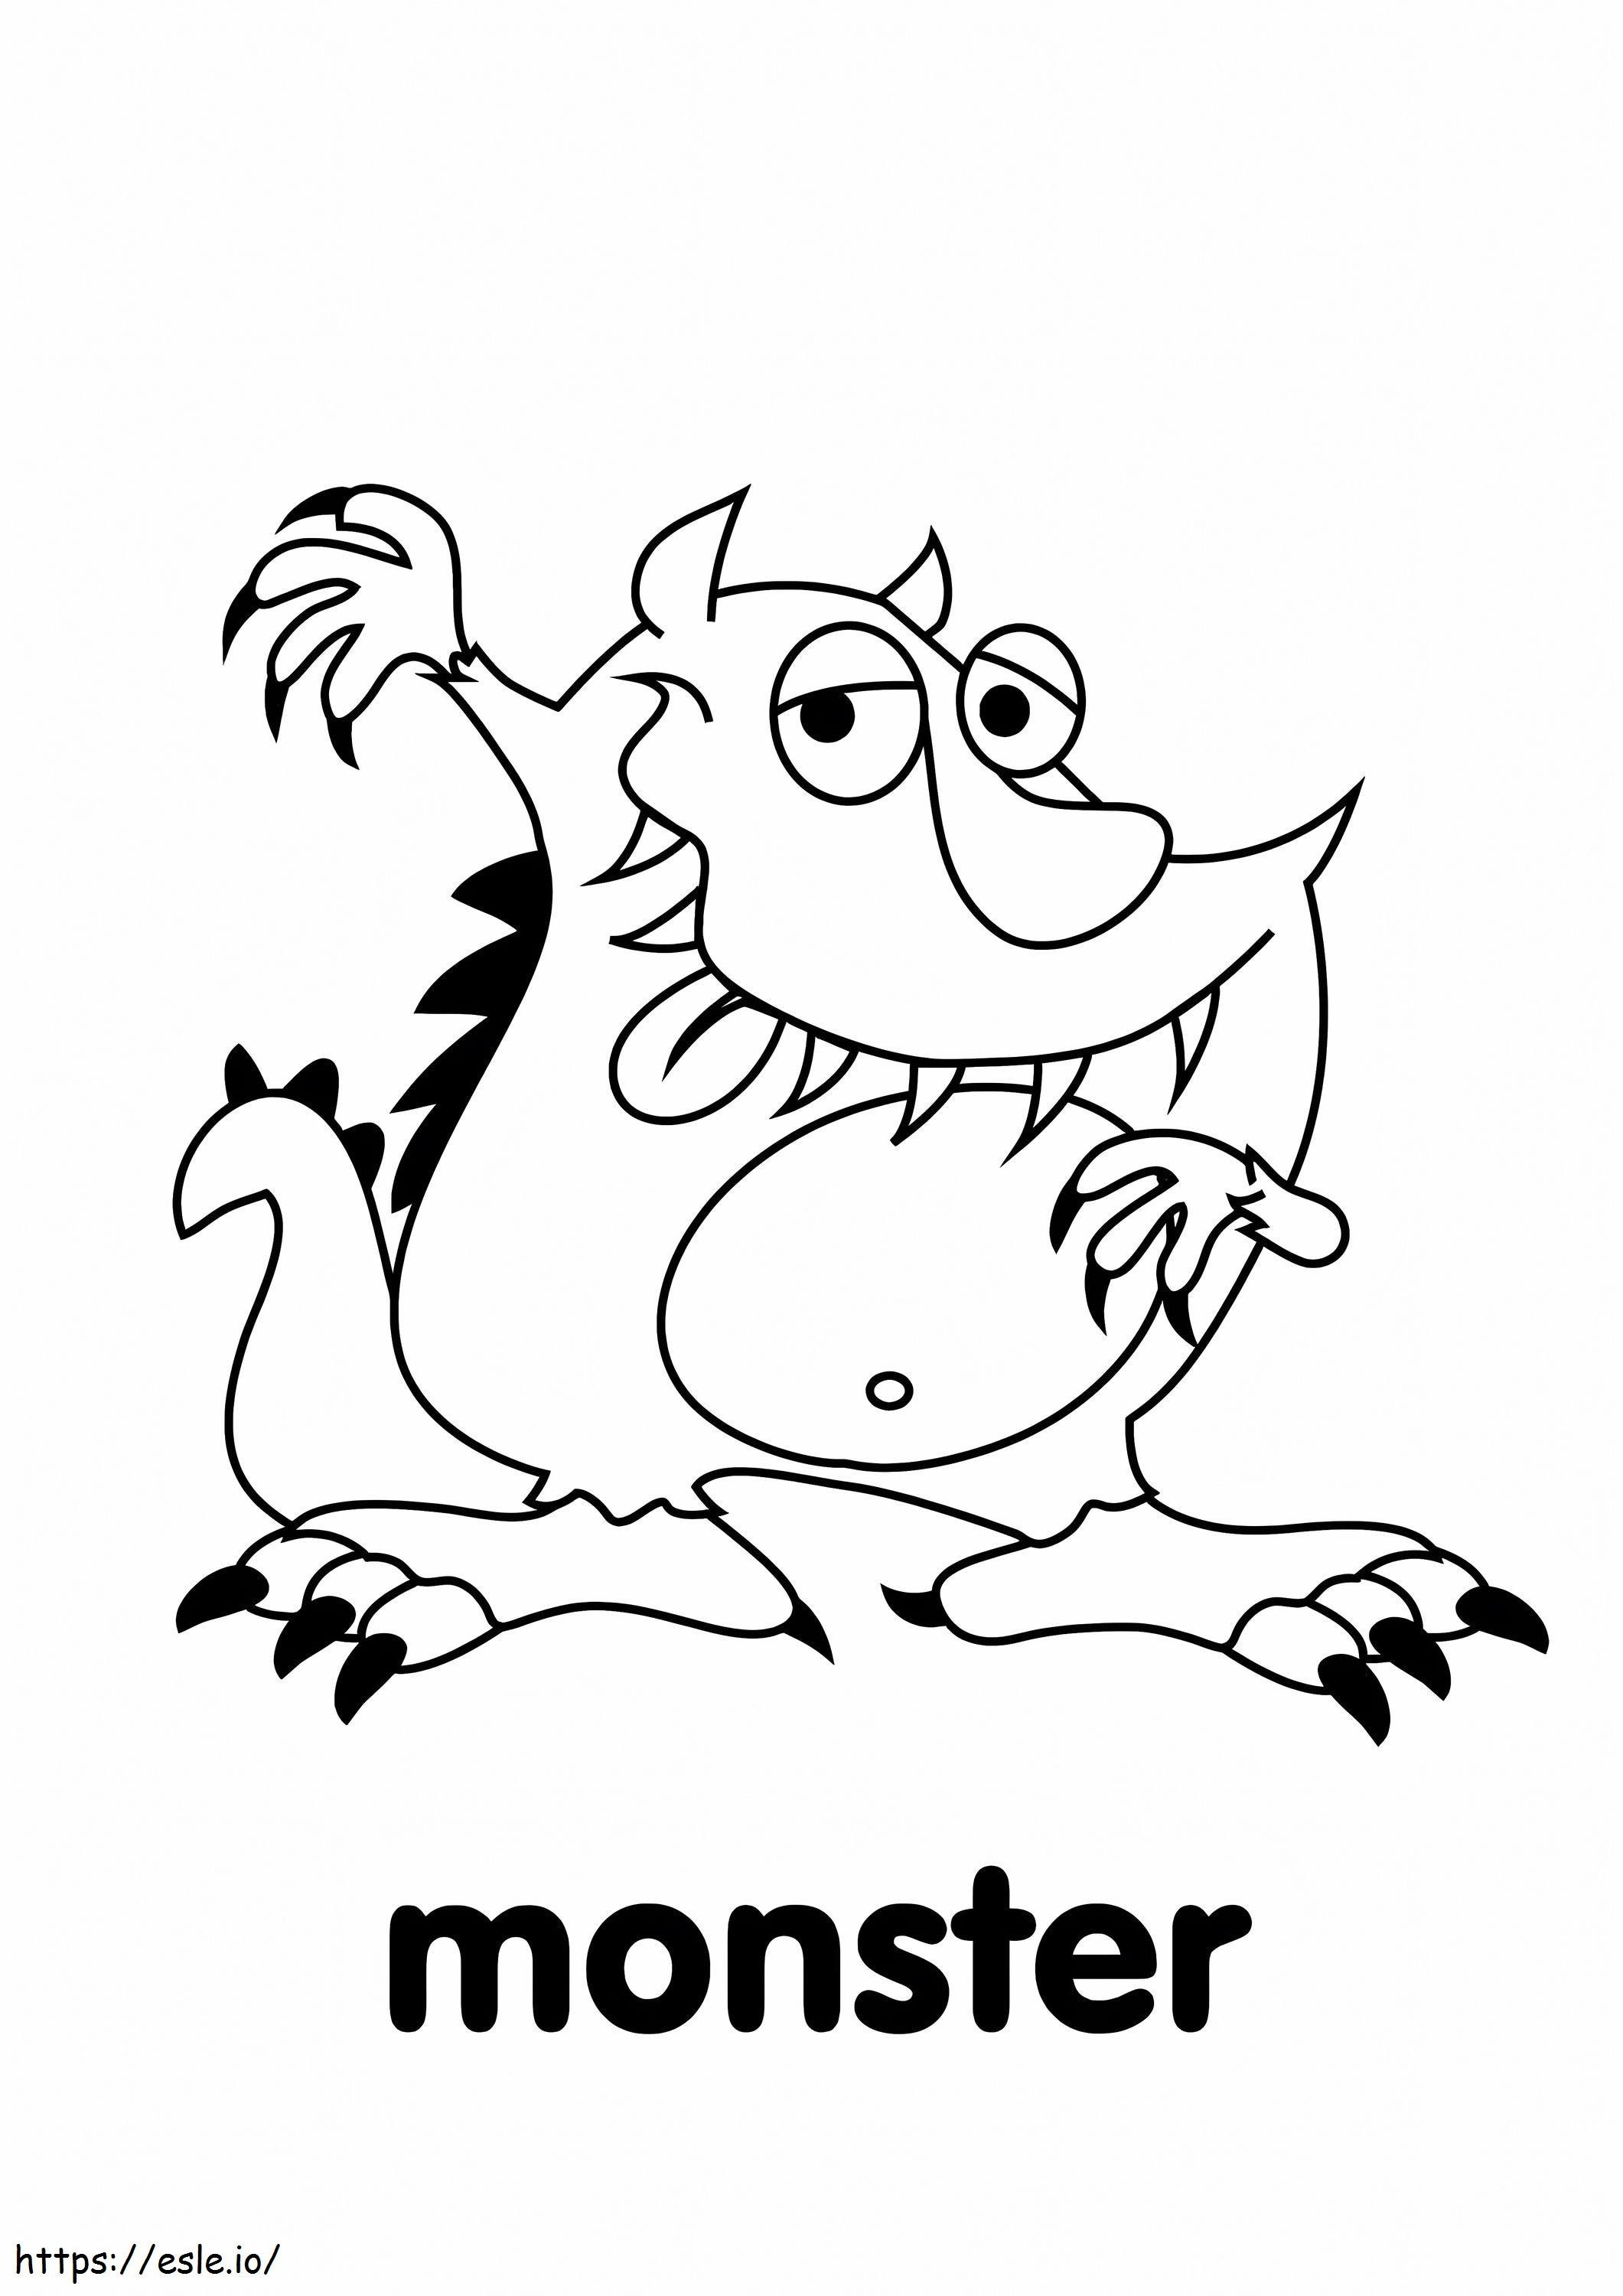 Monster Free coloring page